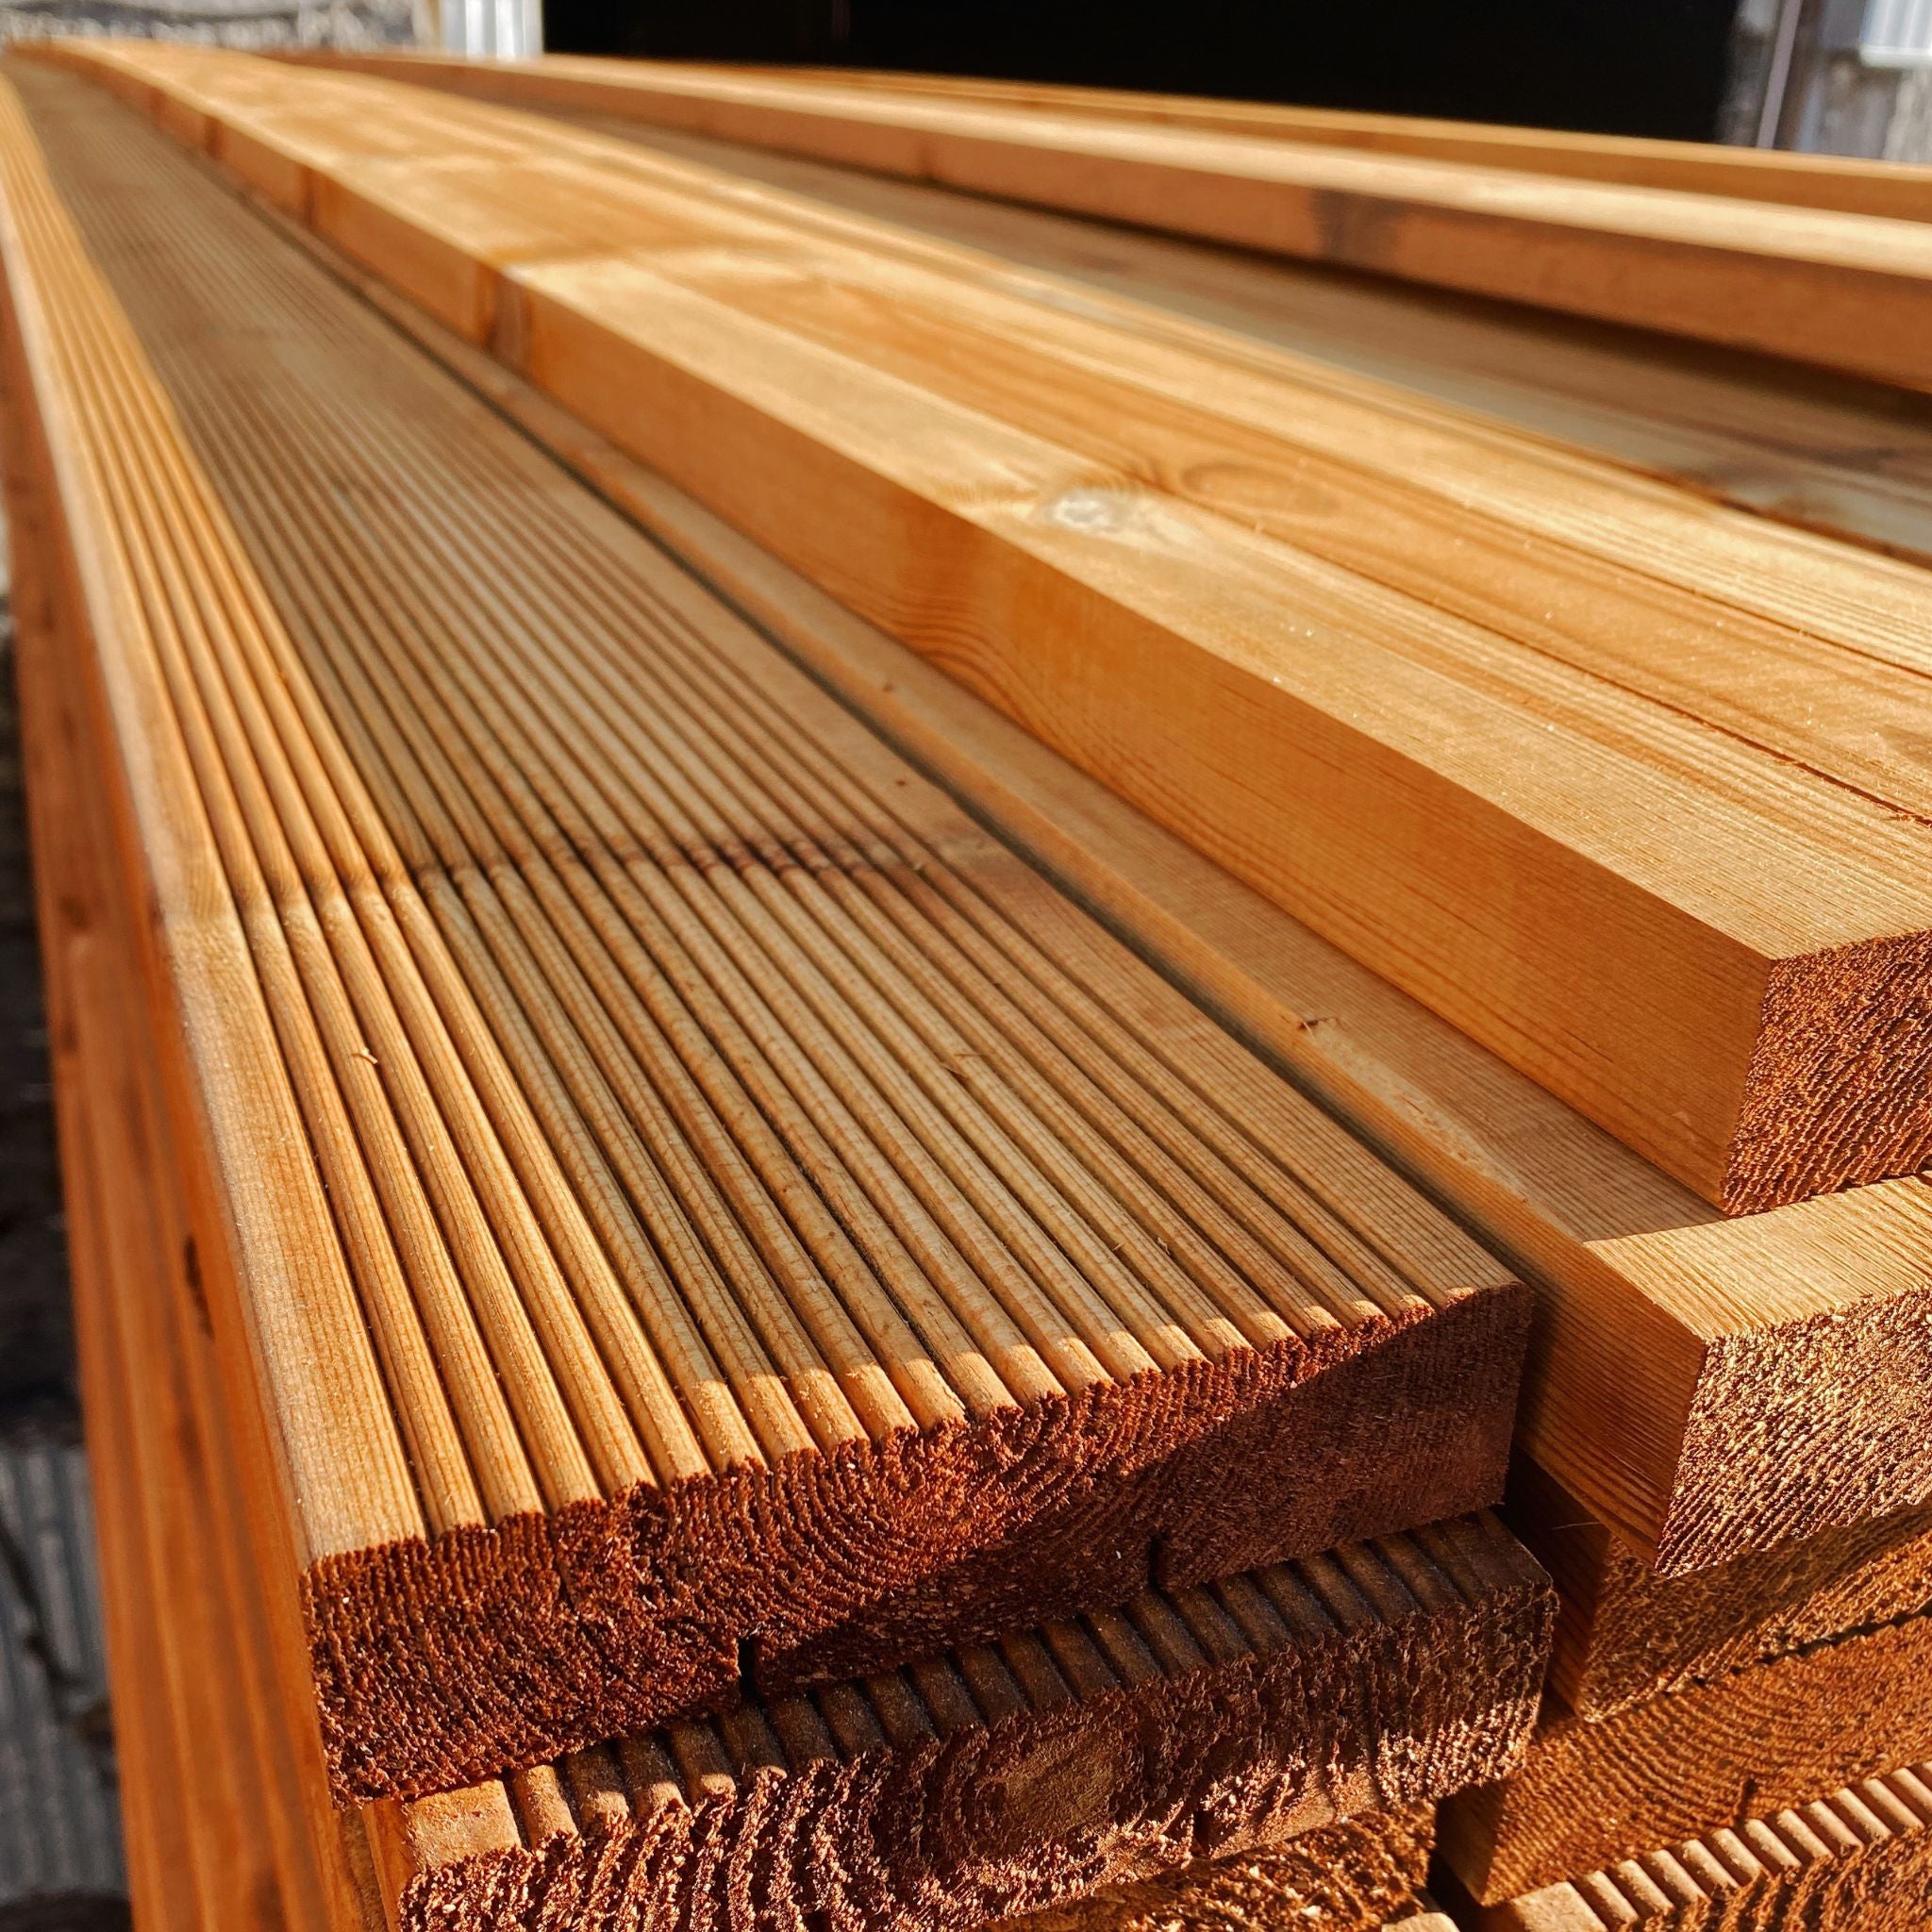 Terrace boards 28mm - impregnated